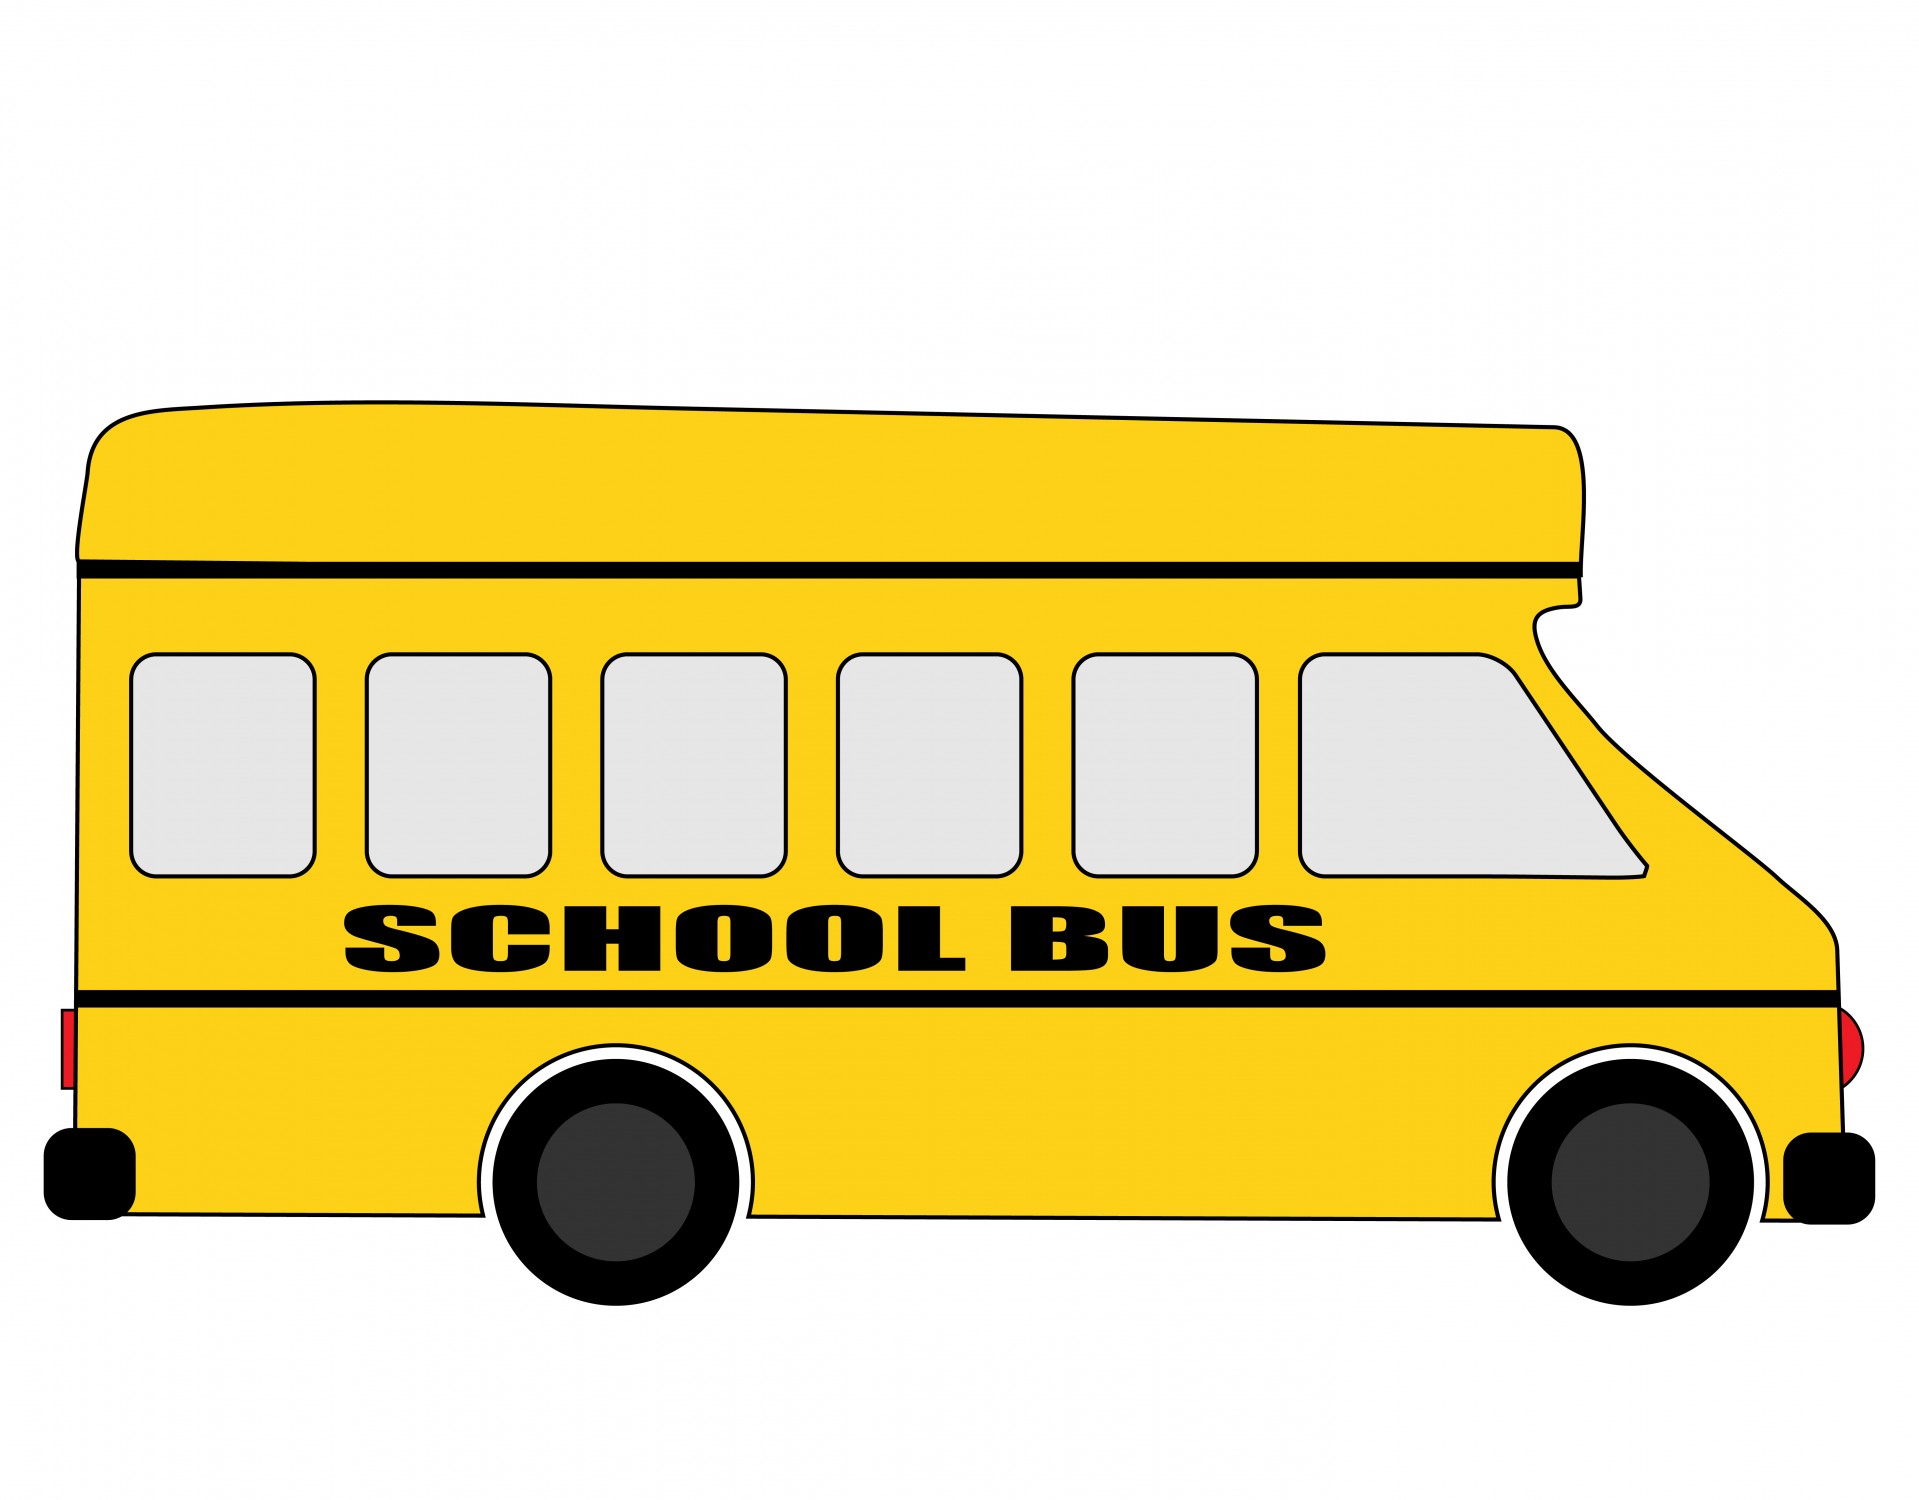 Cute School Bus Images Free Download Clipart